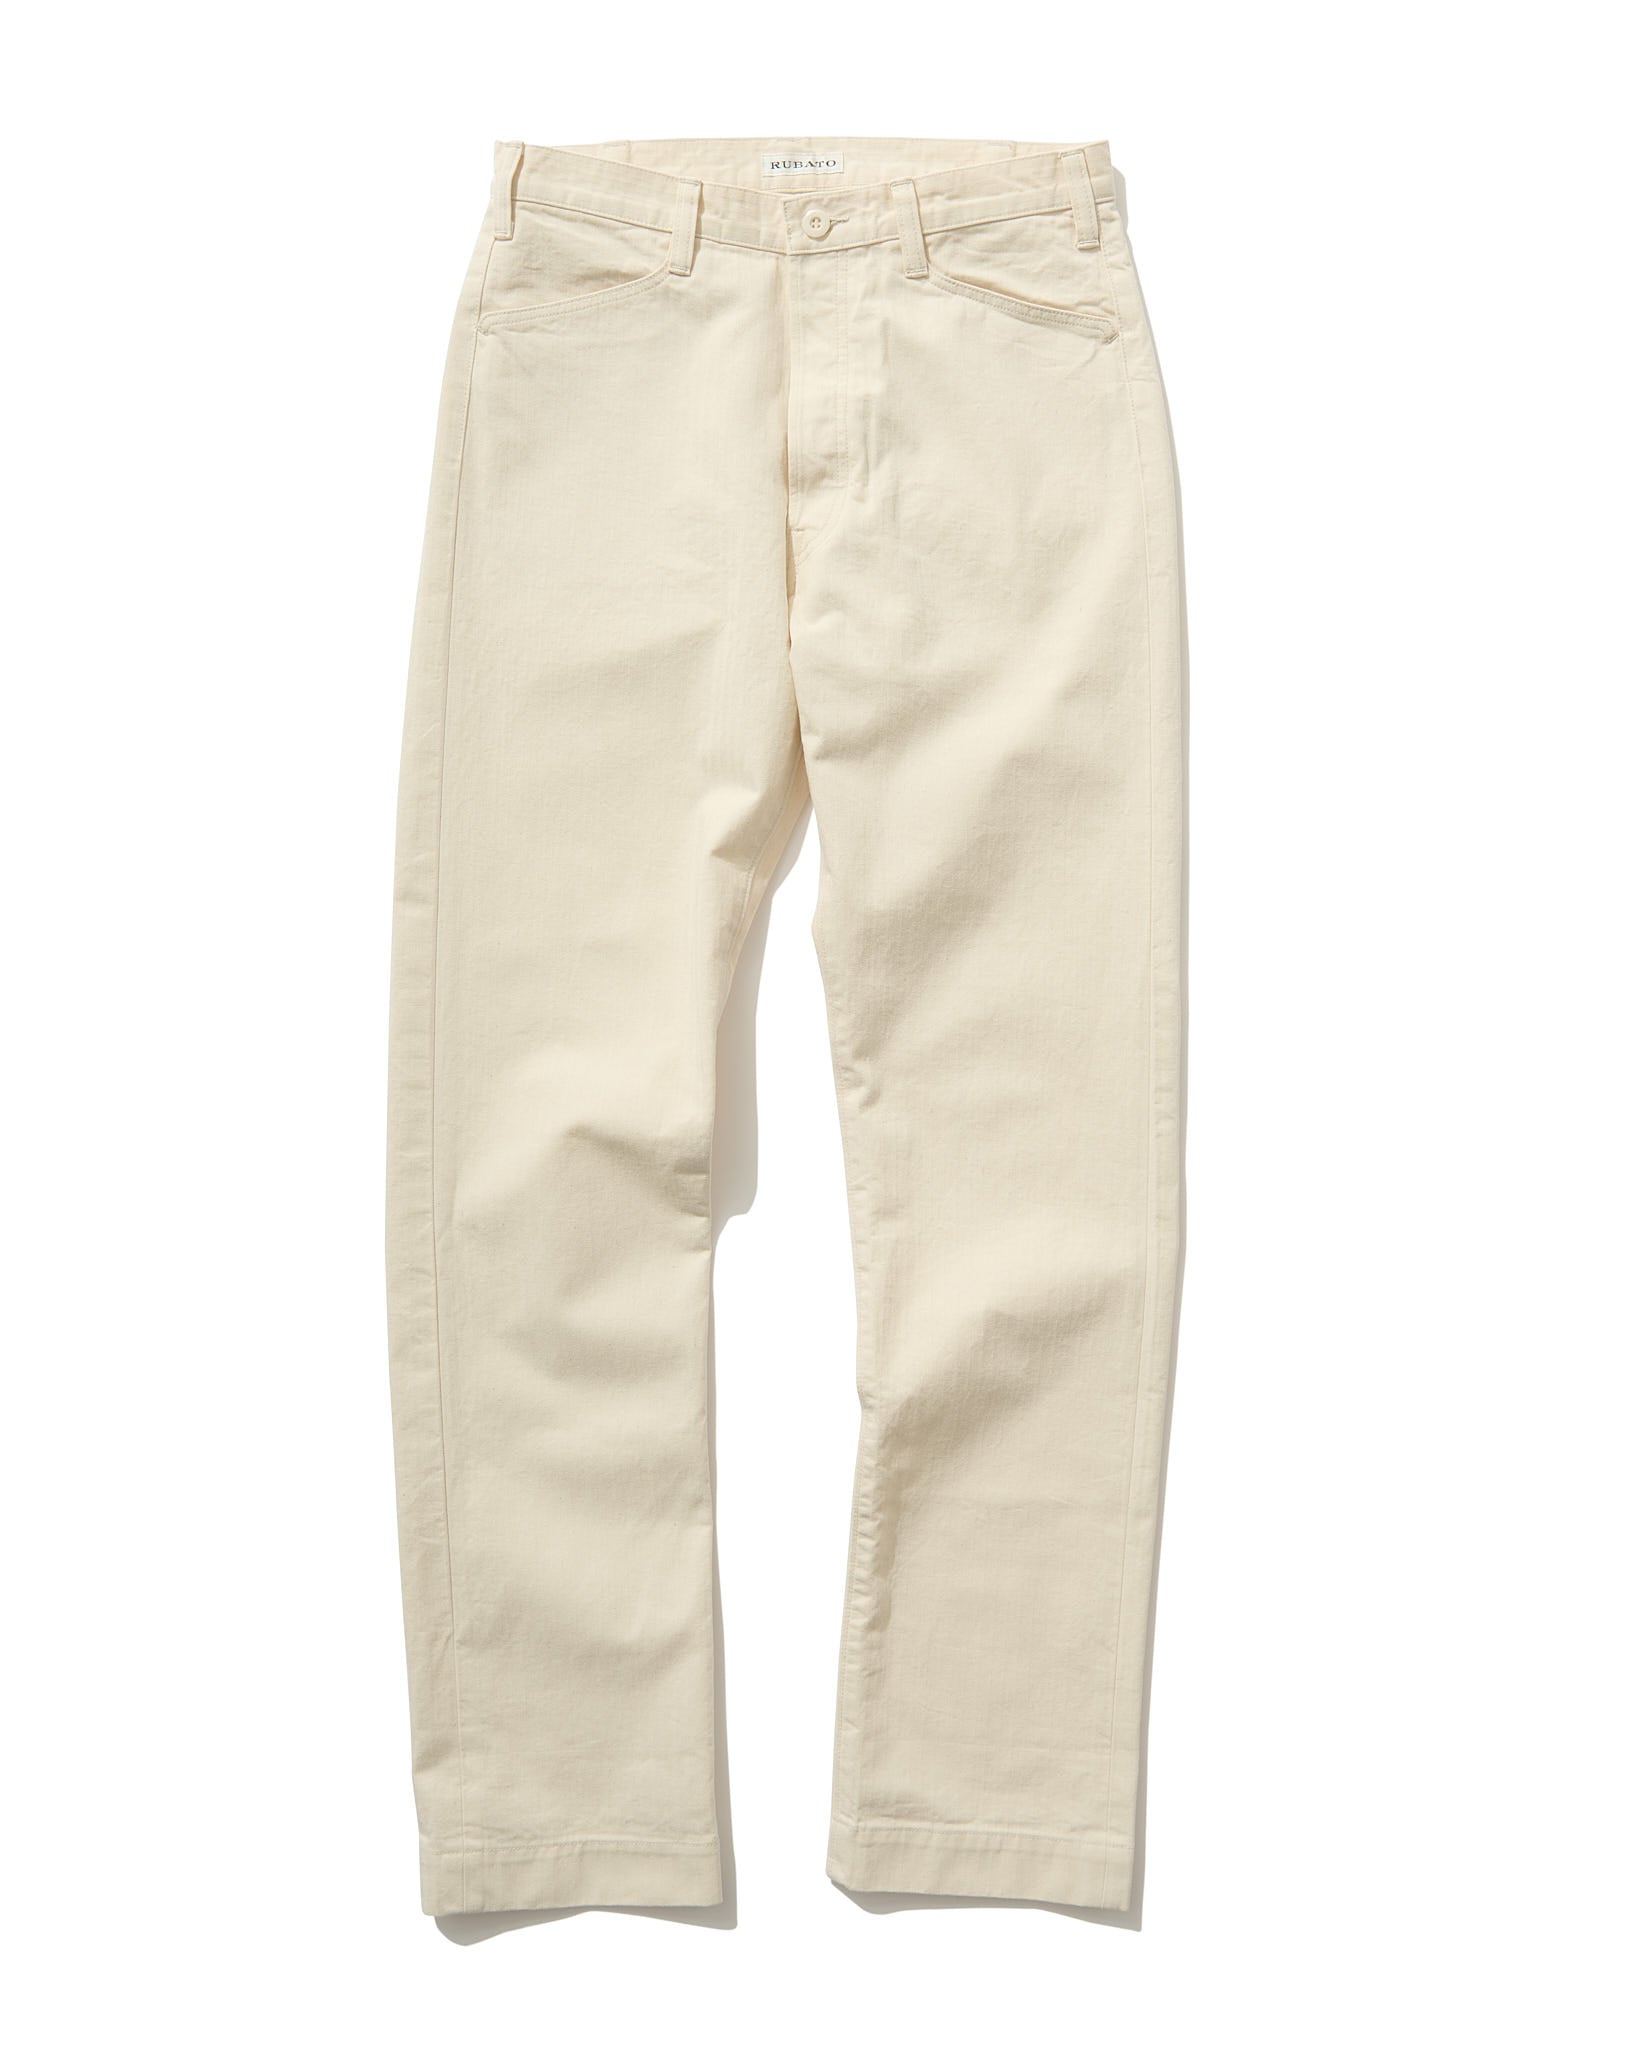 French Pocket Trouser in Cream HBT